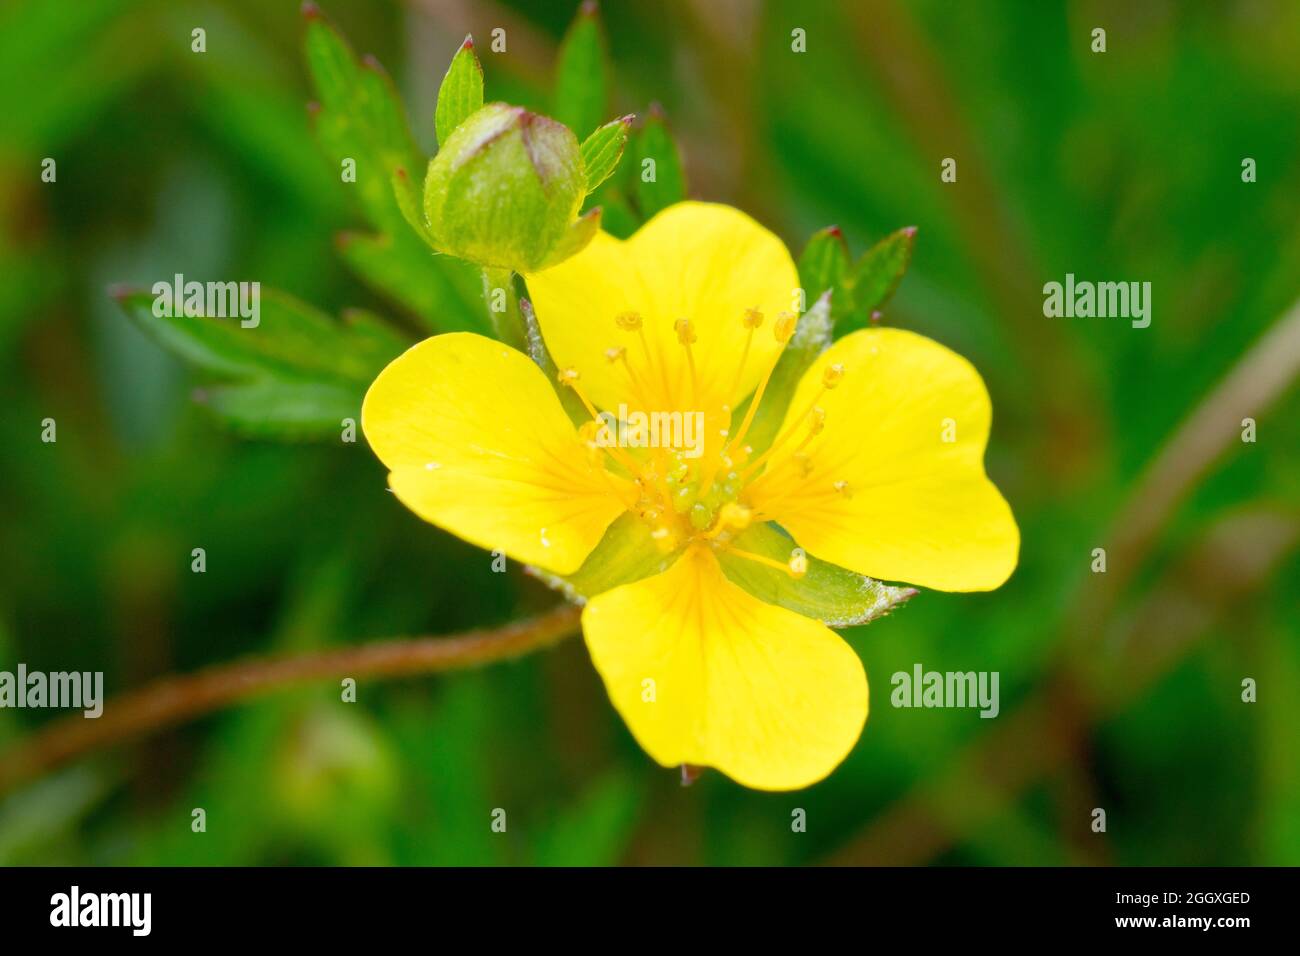 Tormentil (potentilla erecta), close up of a single yellow flower with bud isolated from the background. Stock Photo